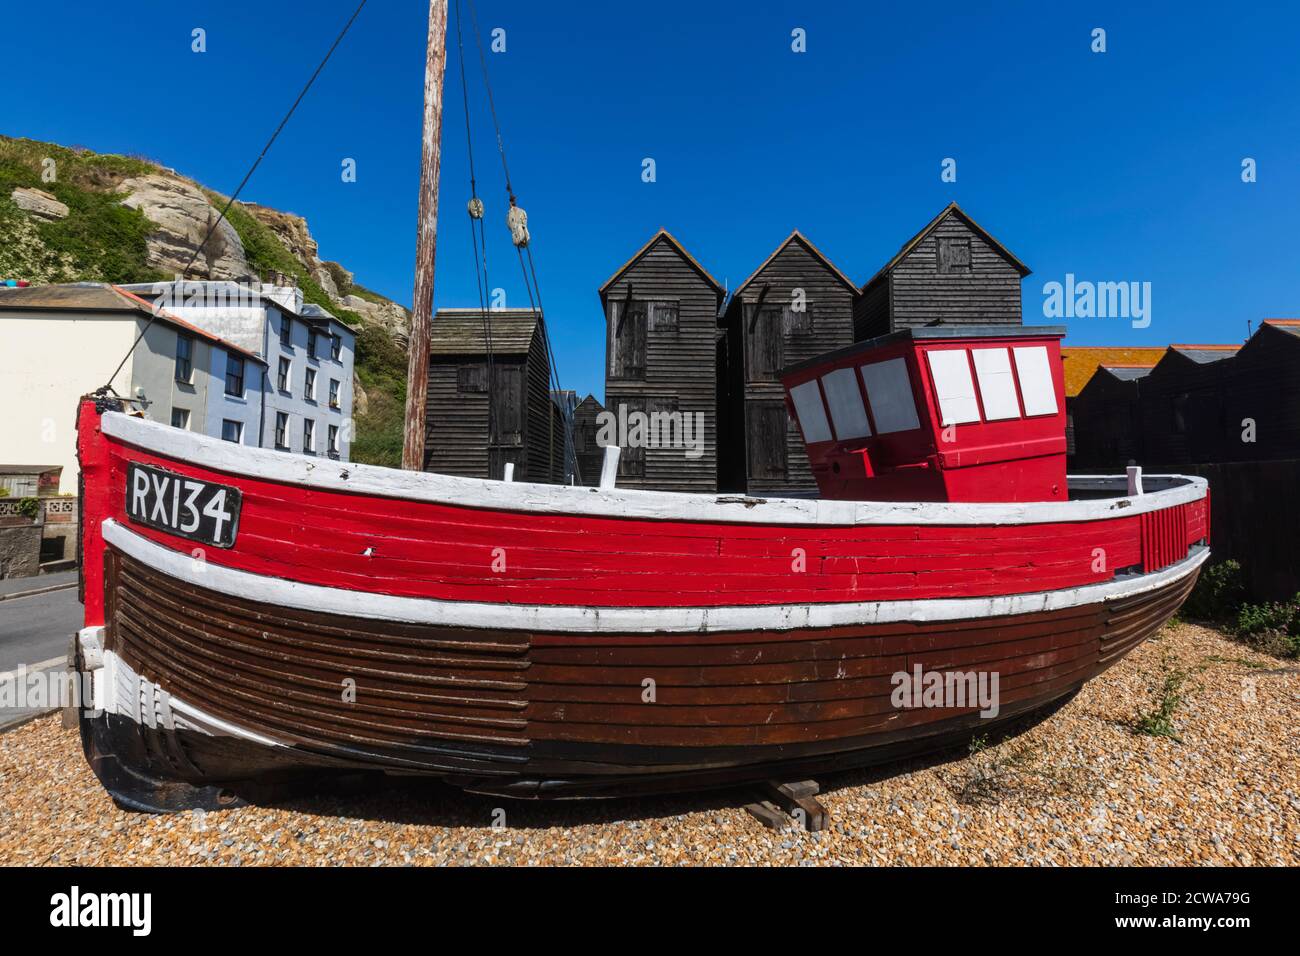 England, East Sussex, Hastings, Old Town, Rock-a-nore, Fishermen's Huts and Historic Clinker Fishing Boat Stock Photo